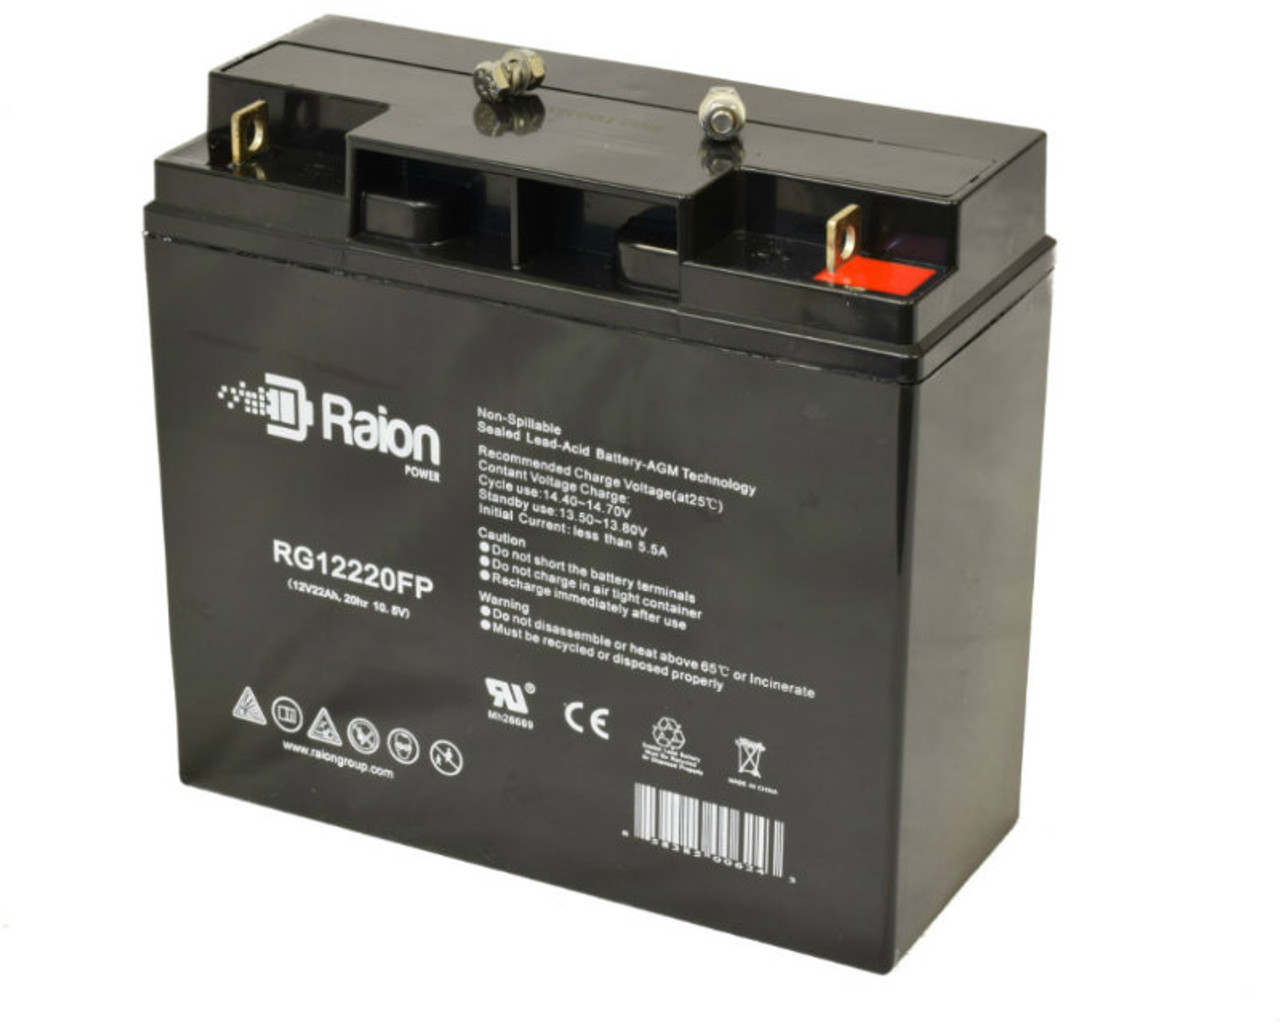 Raion Power Replacement 12V 22Ah Battery for Chilwee 6-FM-24 - 1 Pack